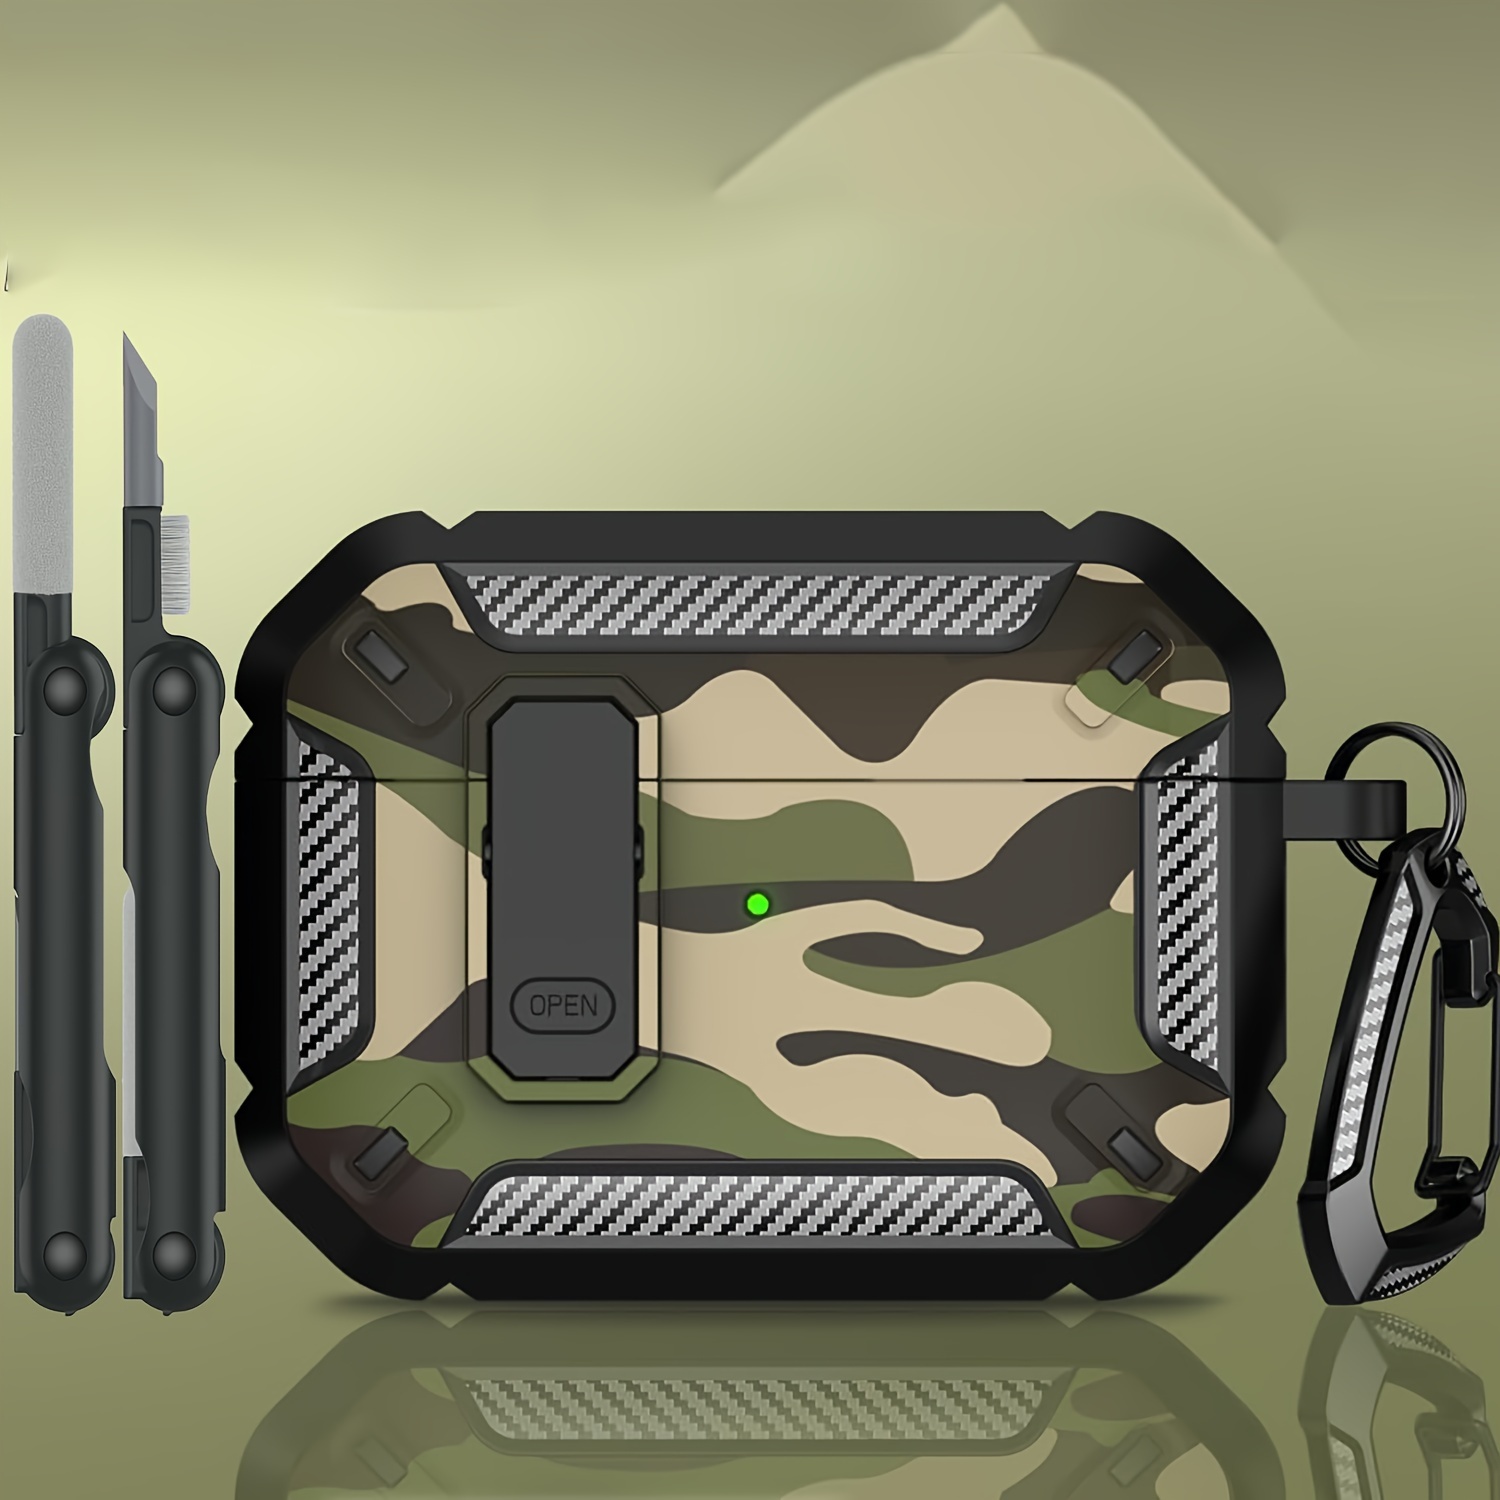 

Military-grade Hard Shell Case For With Cleaner Kit - Protective Armor Cover With Lock, Front Led Visibility